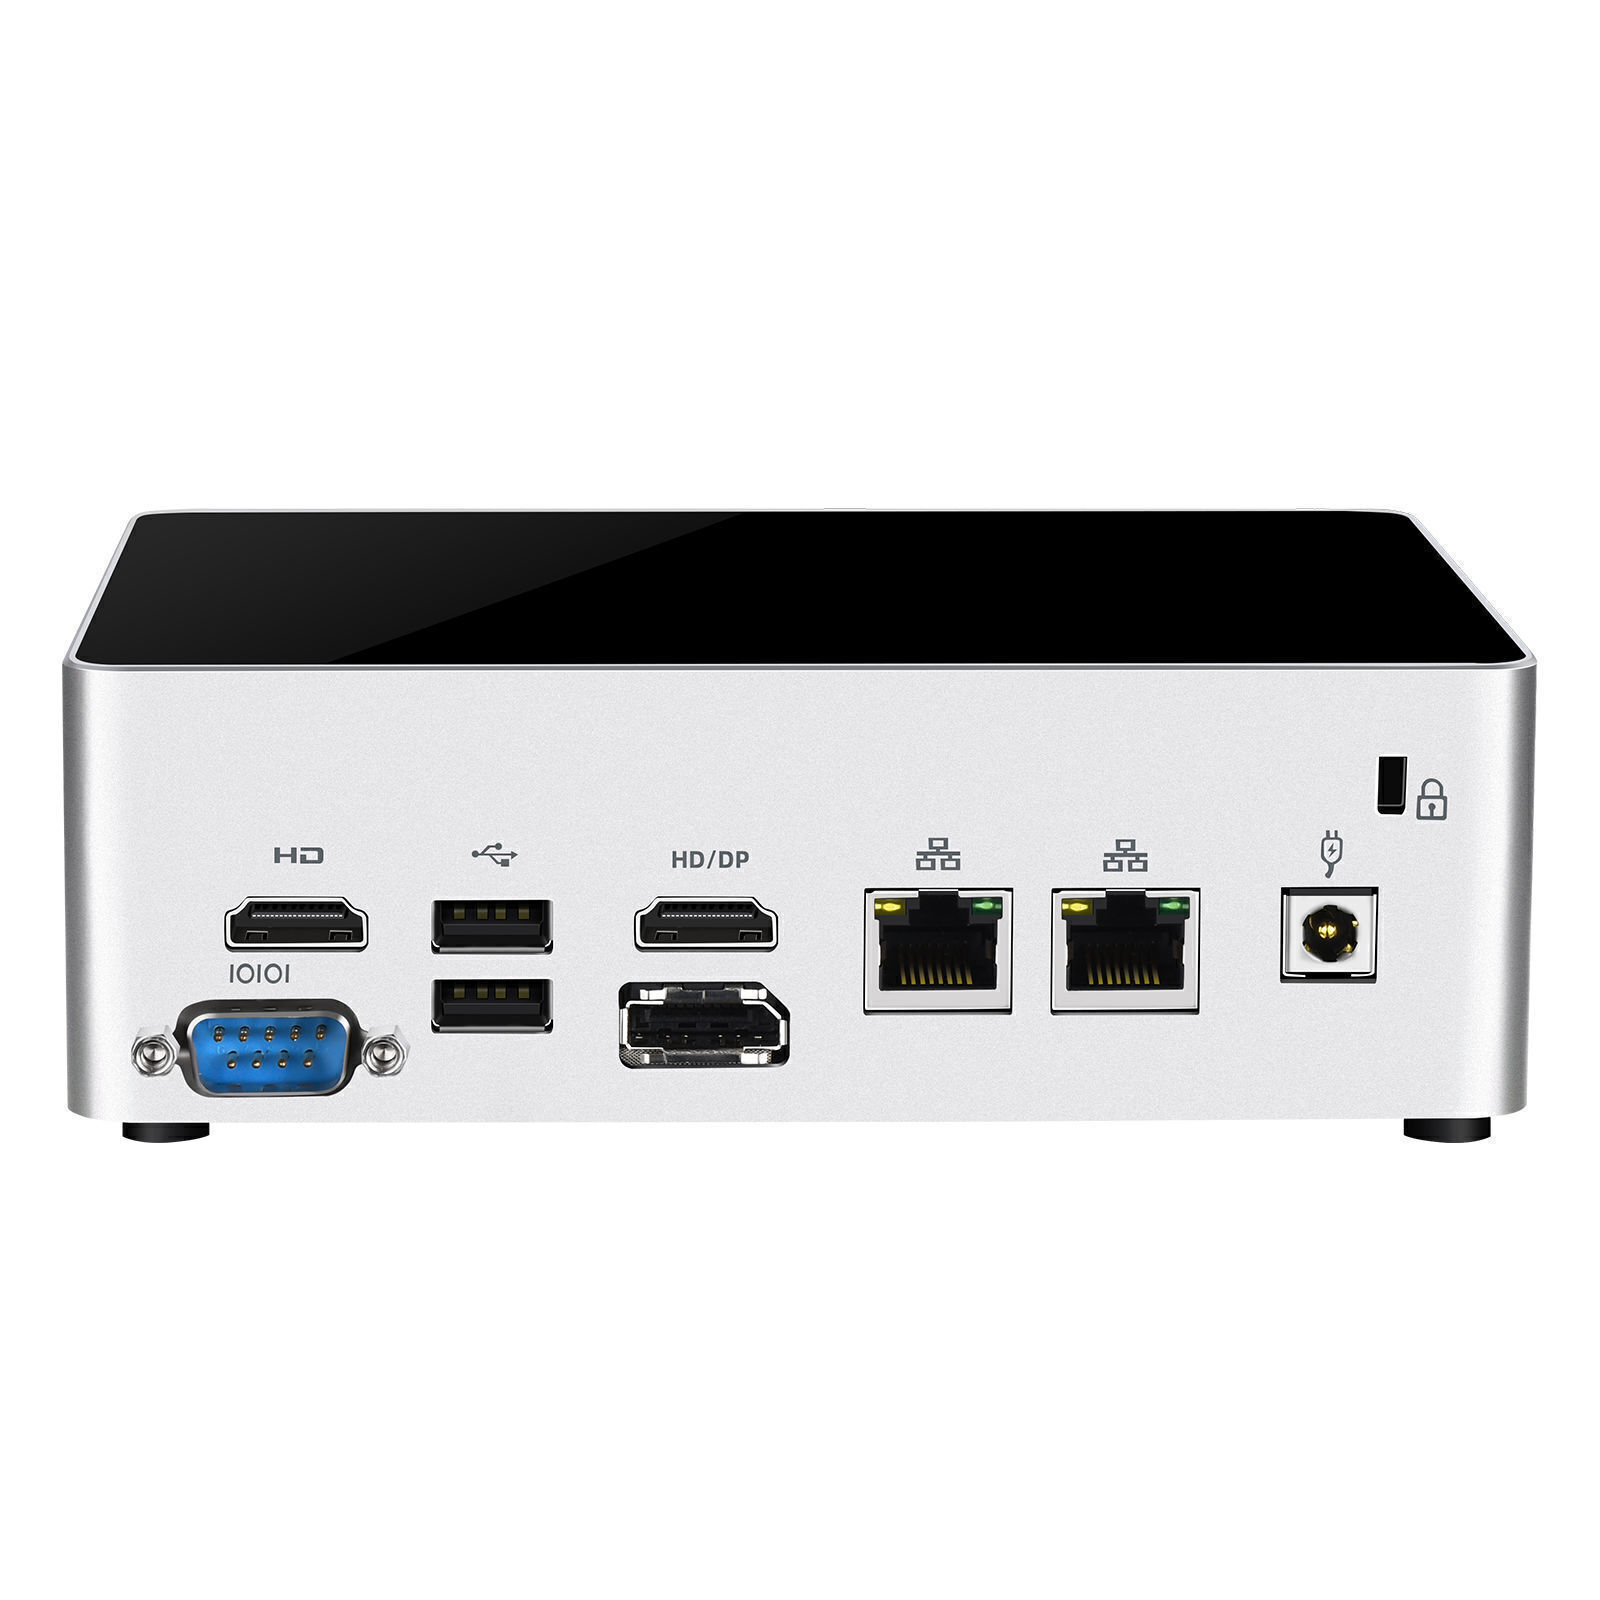 Buy Wholesale China Fanless Mini Pc With Core I5 8250u Ddr4 Faster